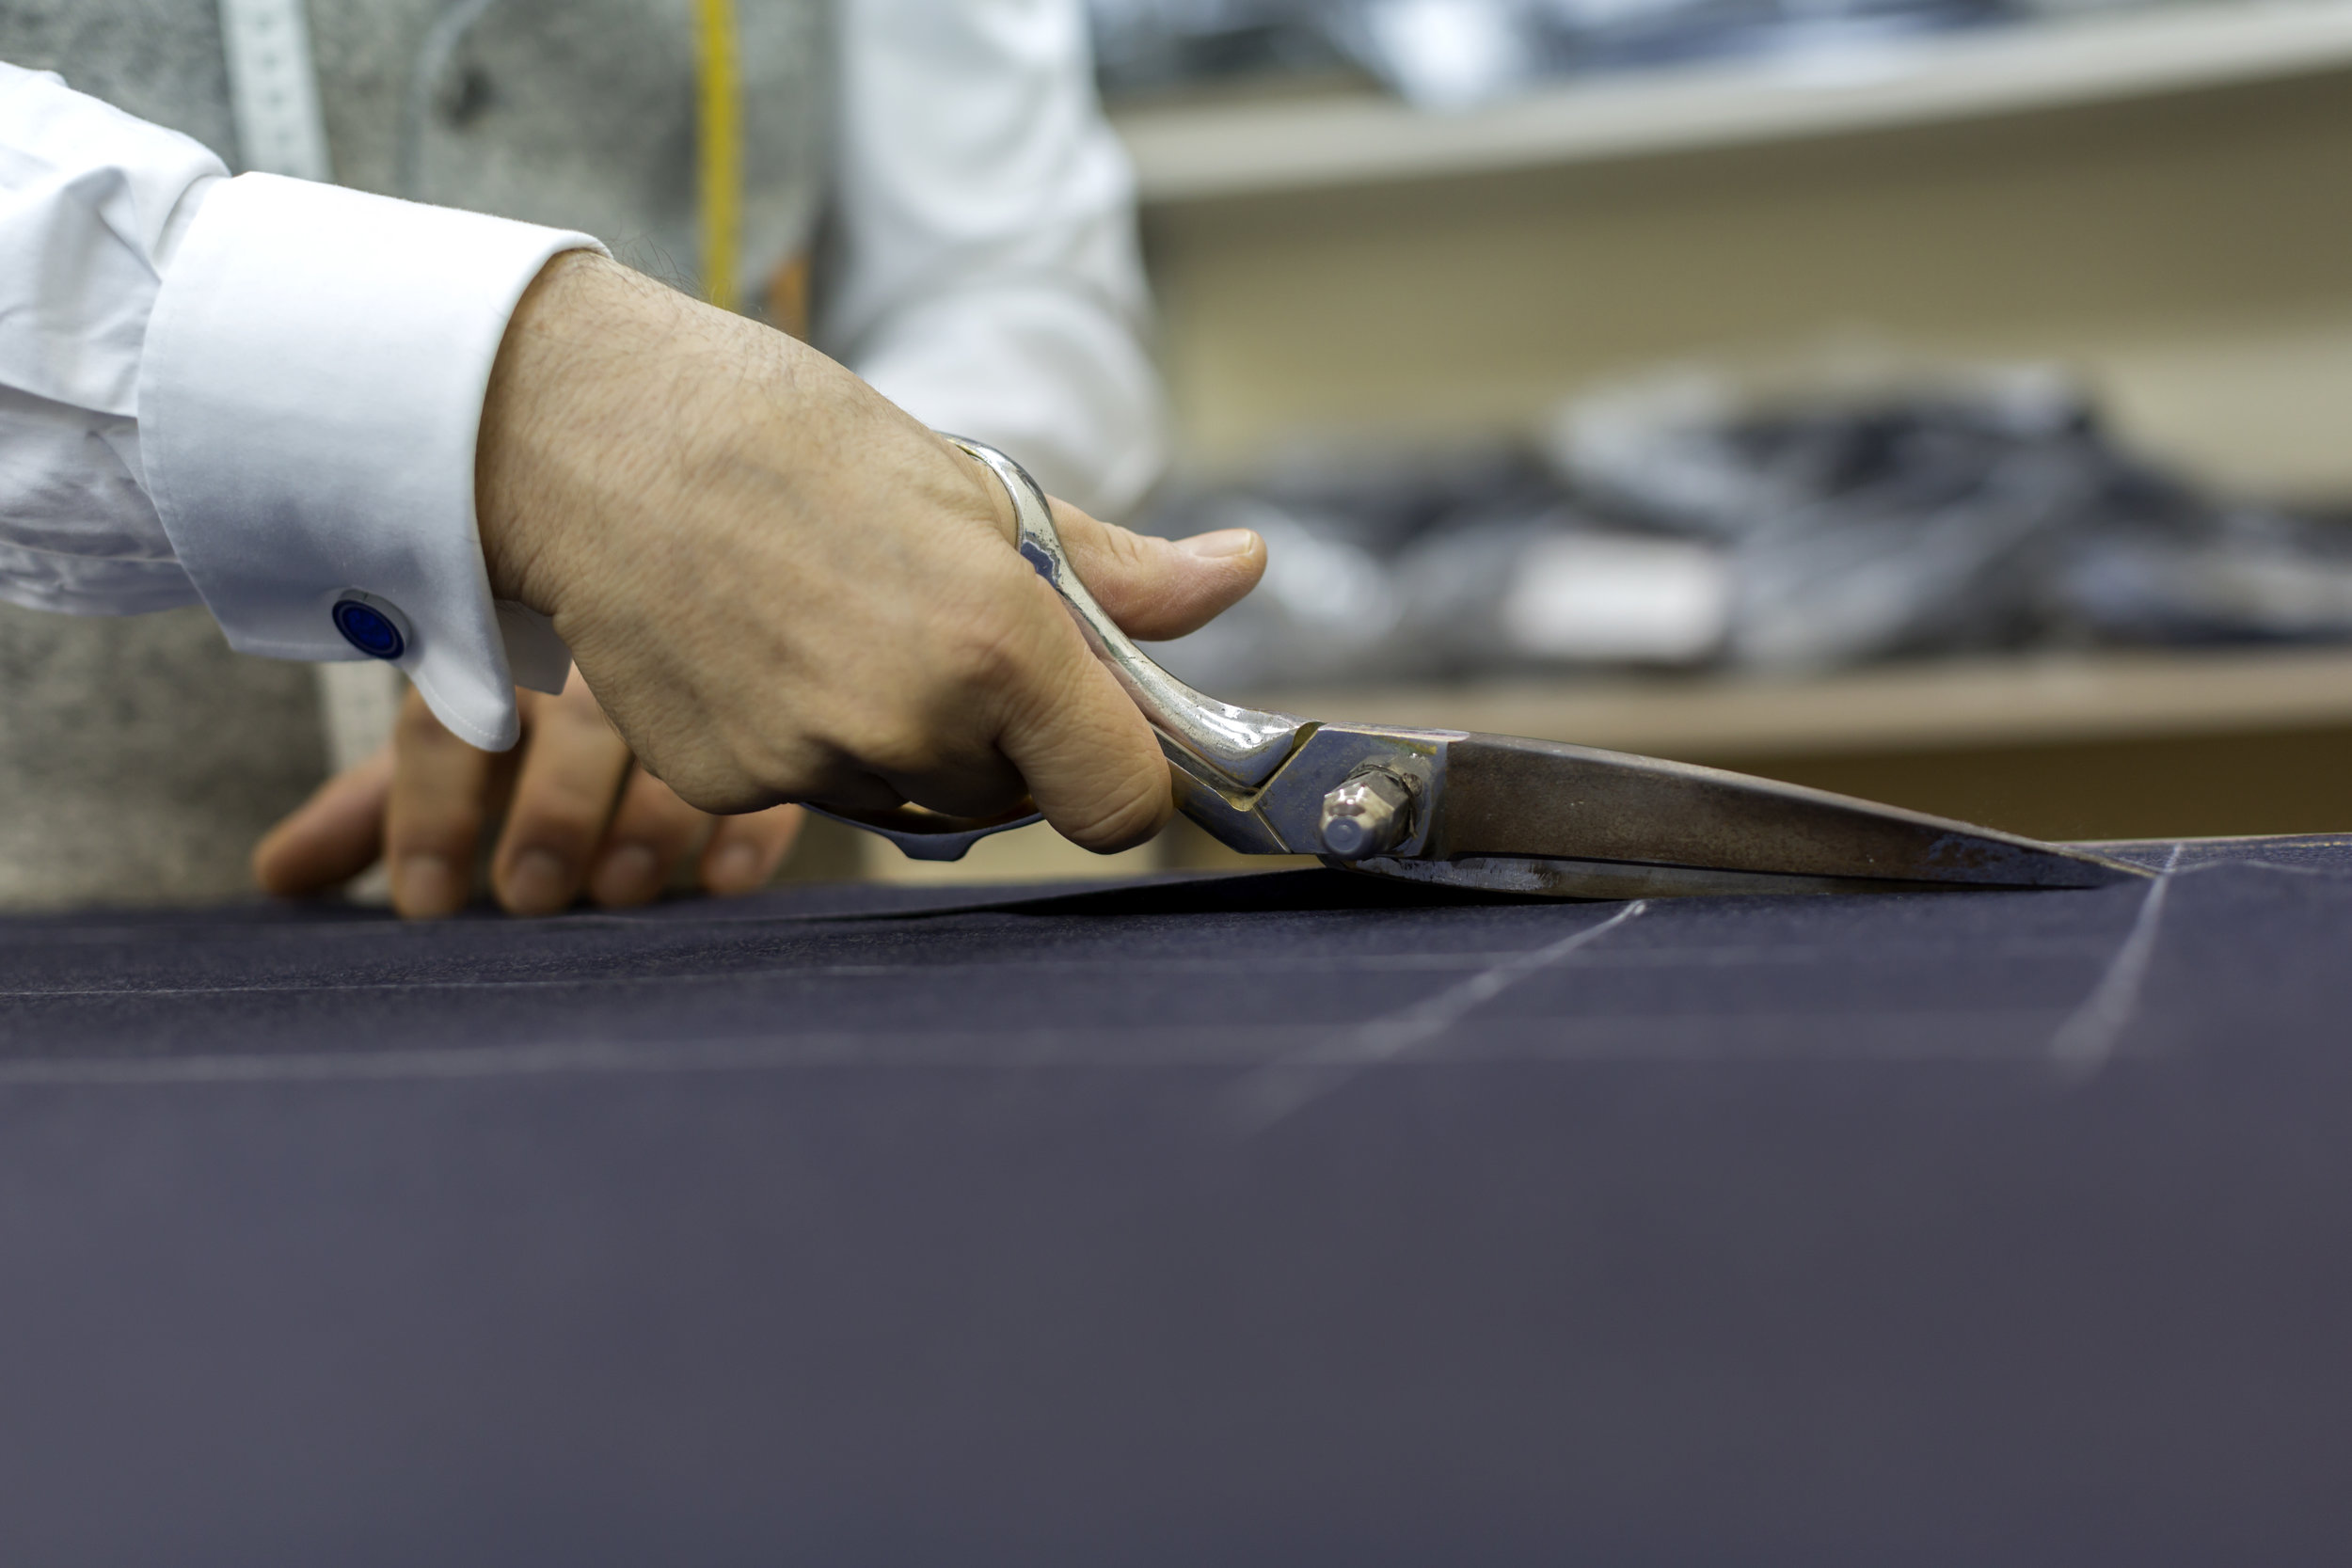 Hand cutting fabric with scissors 